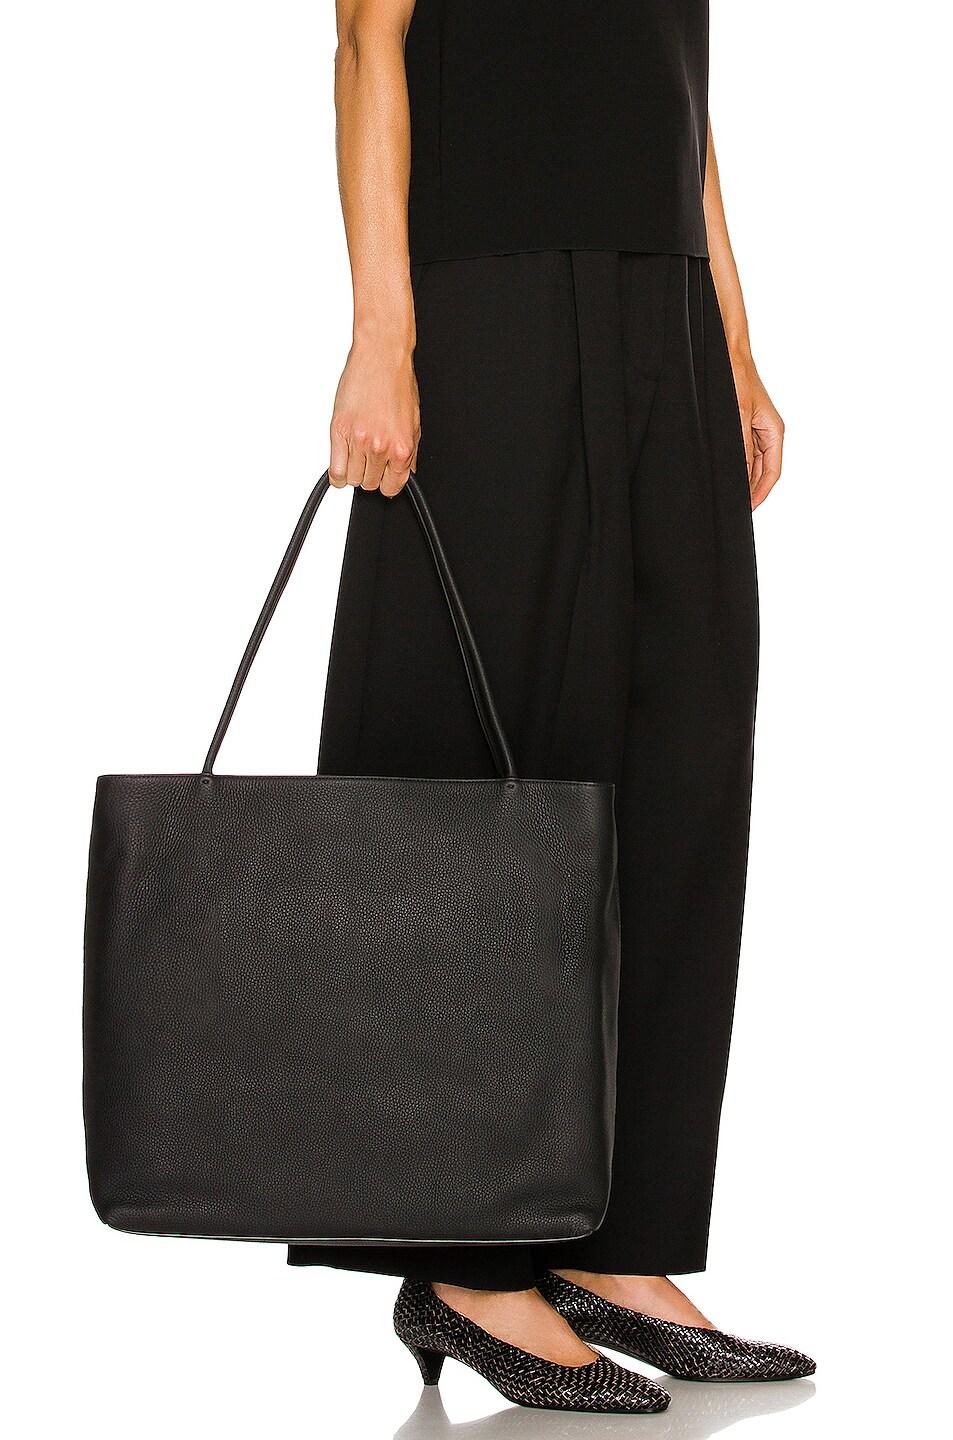 complications mental Alleged The Row Large Portfolio Bag in Black | Lyst